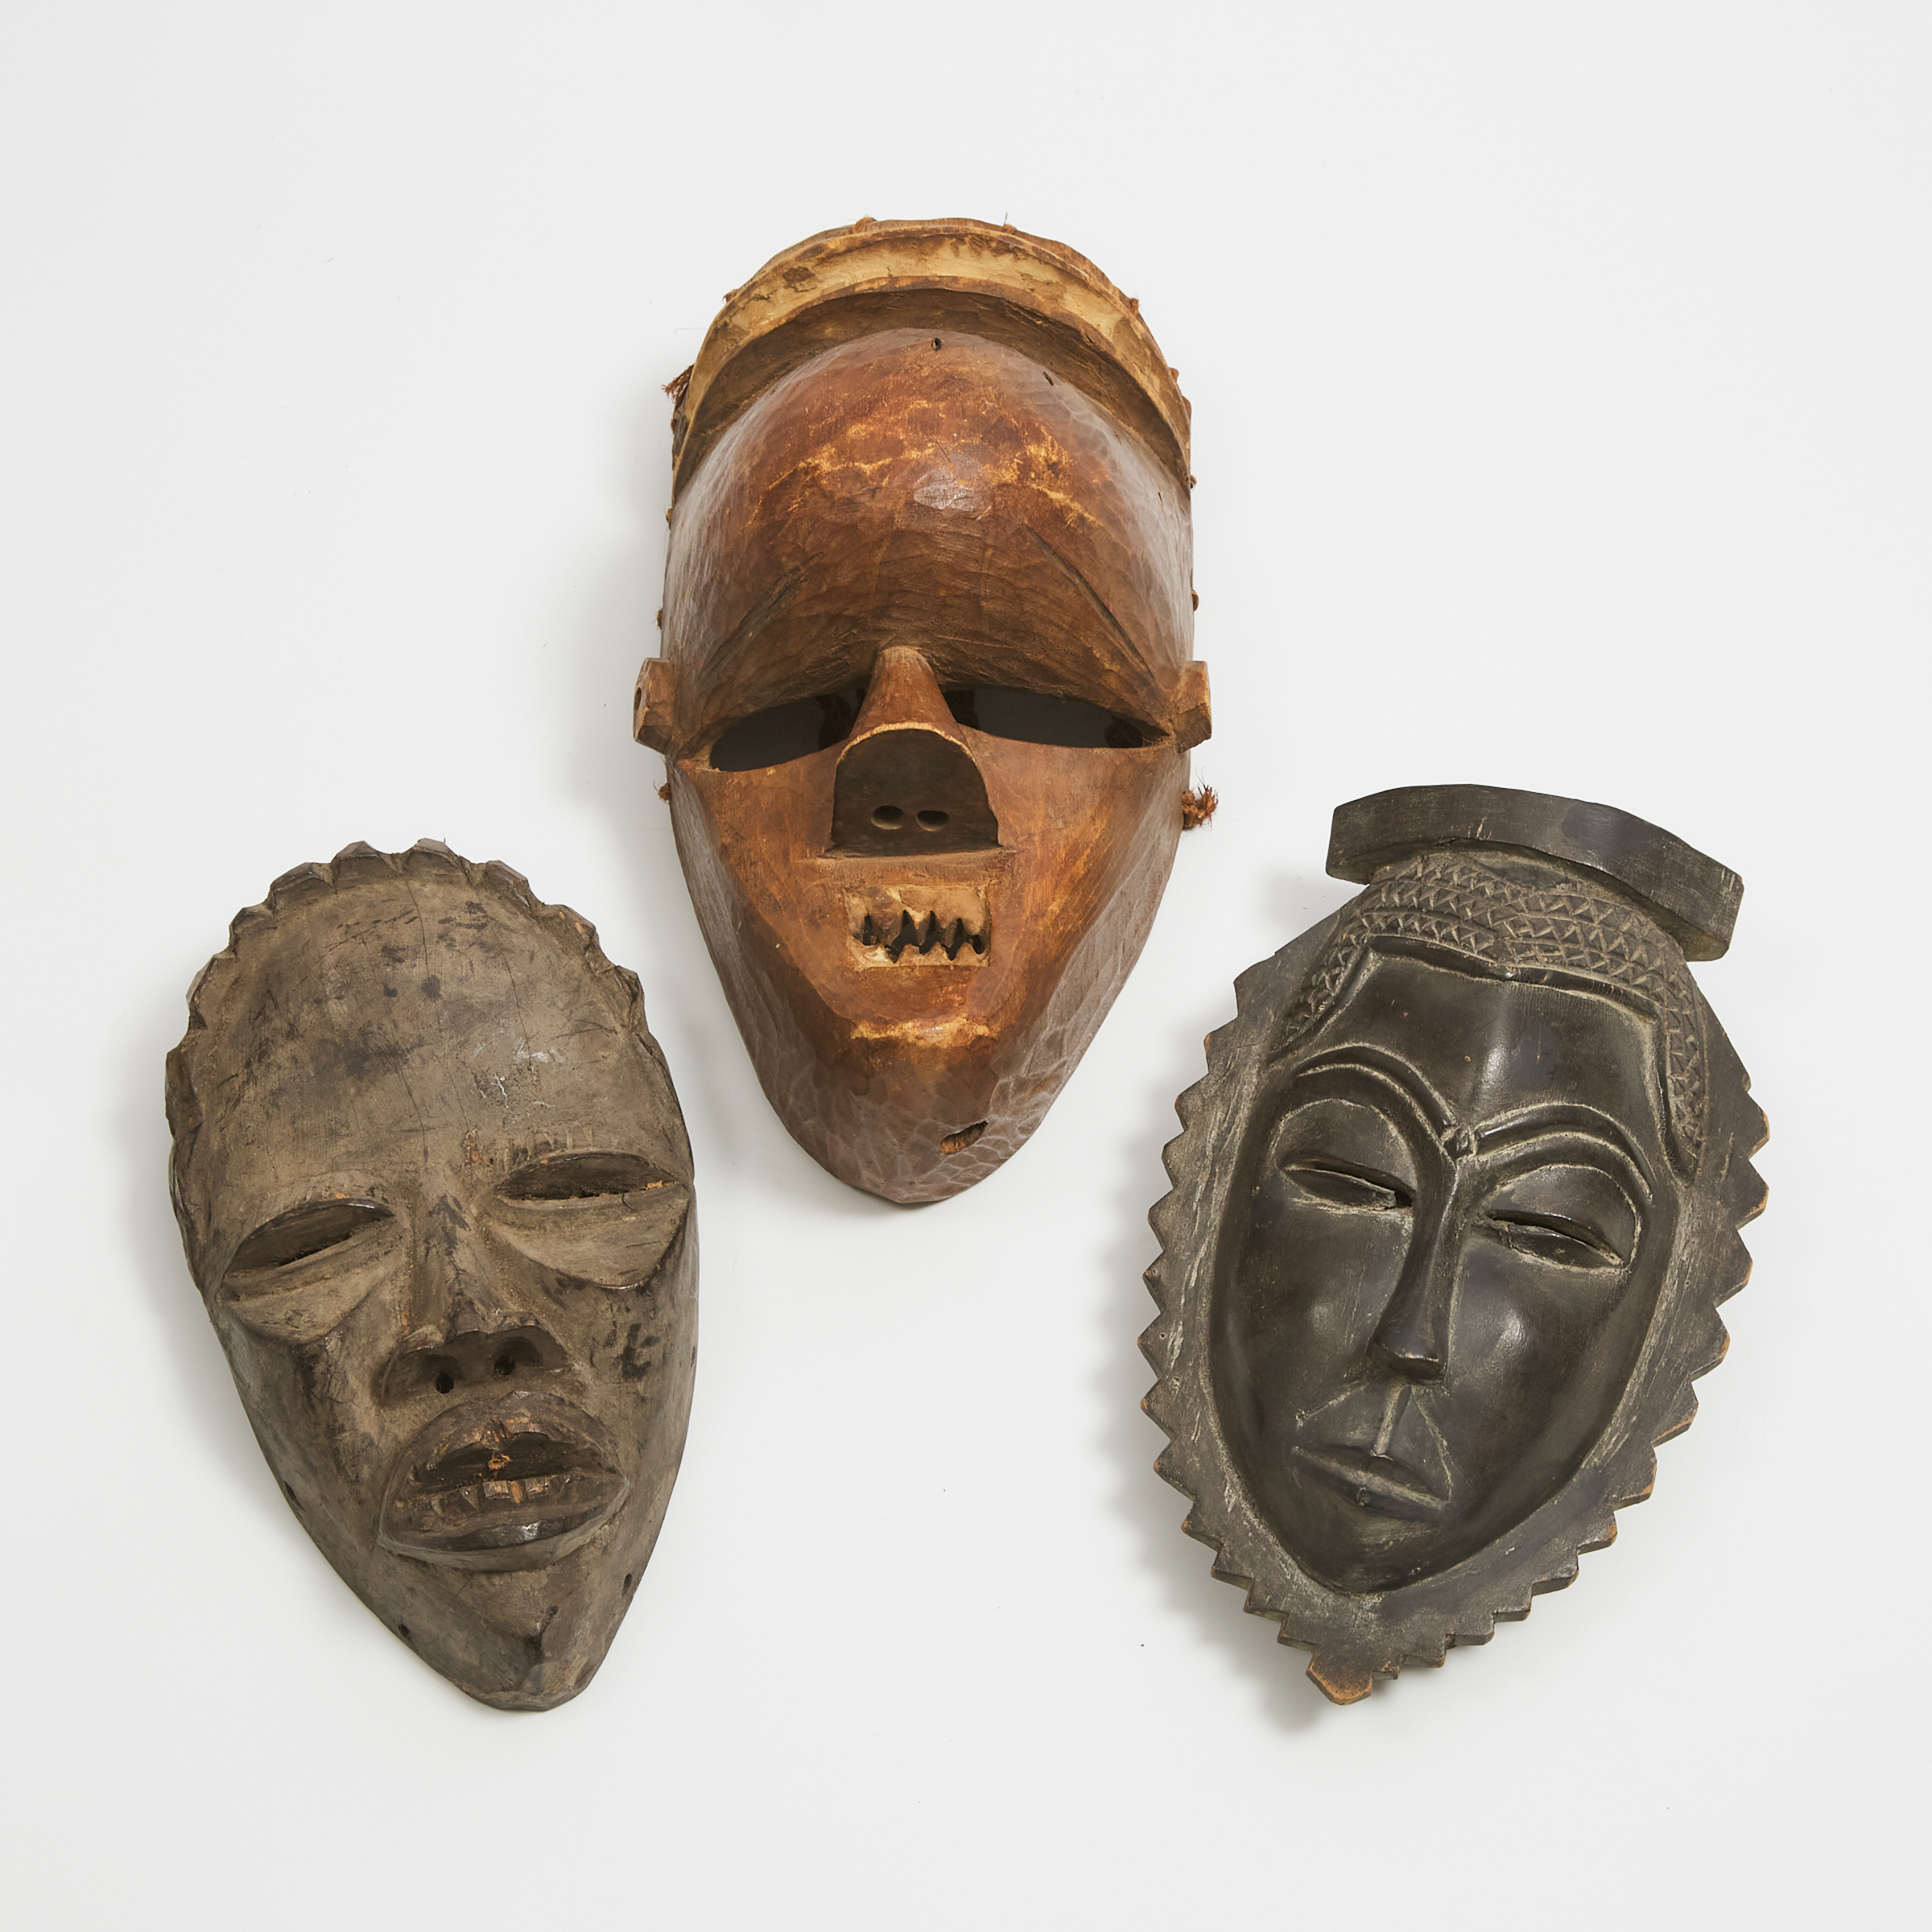 Salampasu Mask, Lulua River, Democratic Republic of Congo, togwther with a Dan and a Baule/Guro Mask, Ivory Coast, late 20th century